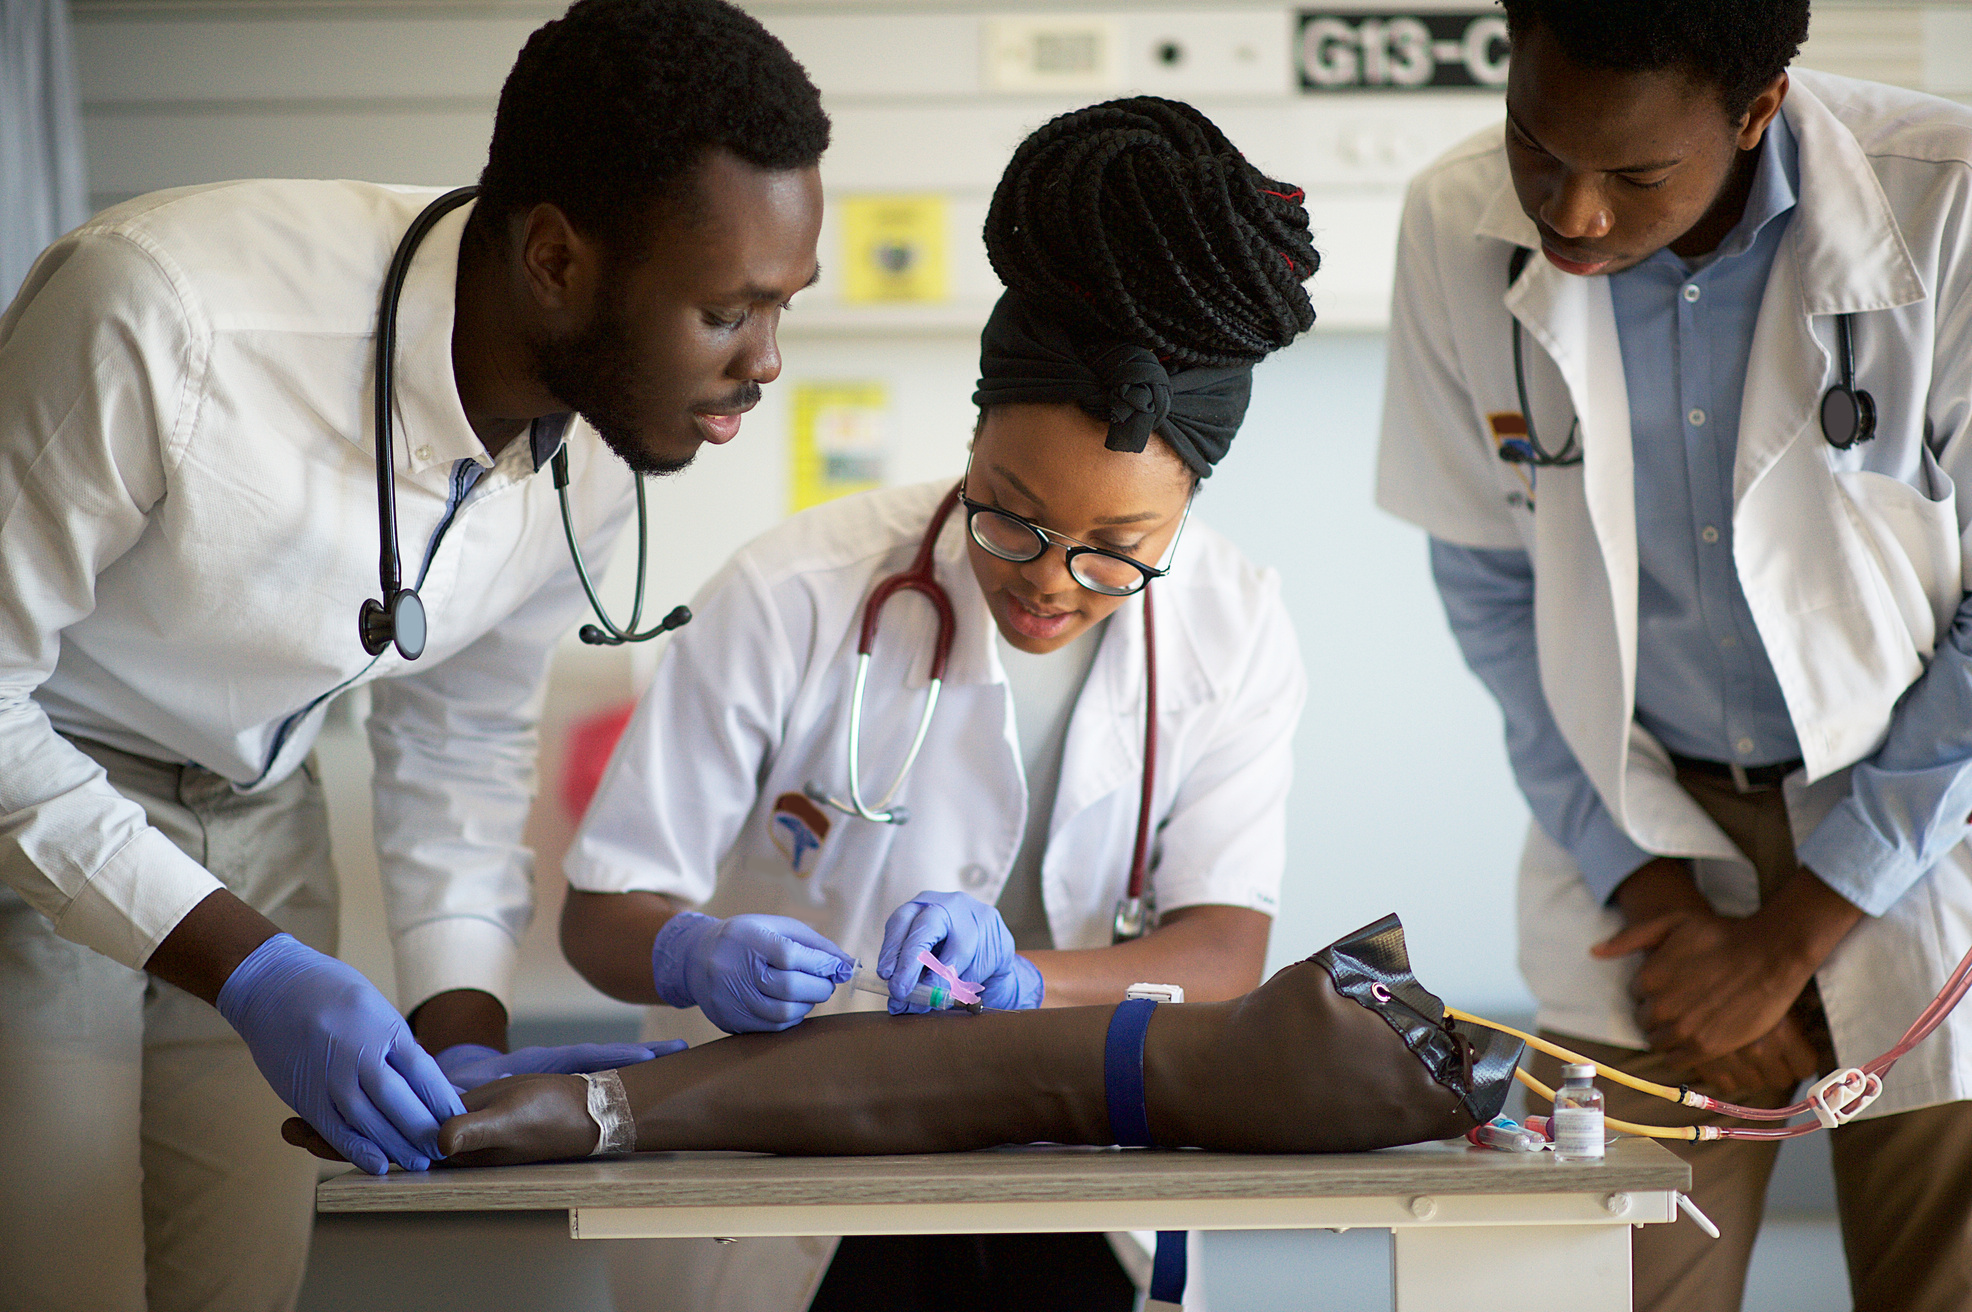 Students practising IV injection on a Phlebotomy Venipuncture Practise Arm with help